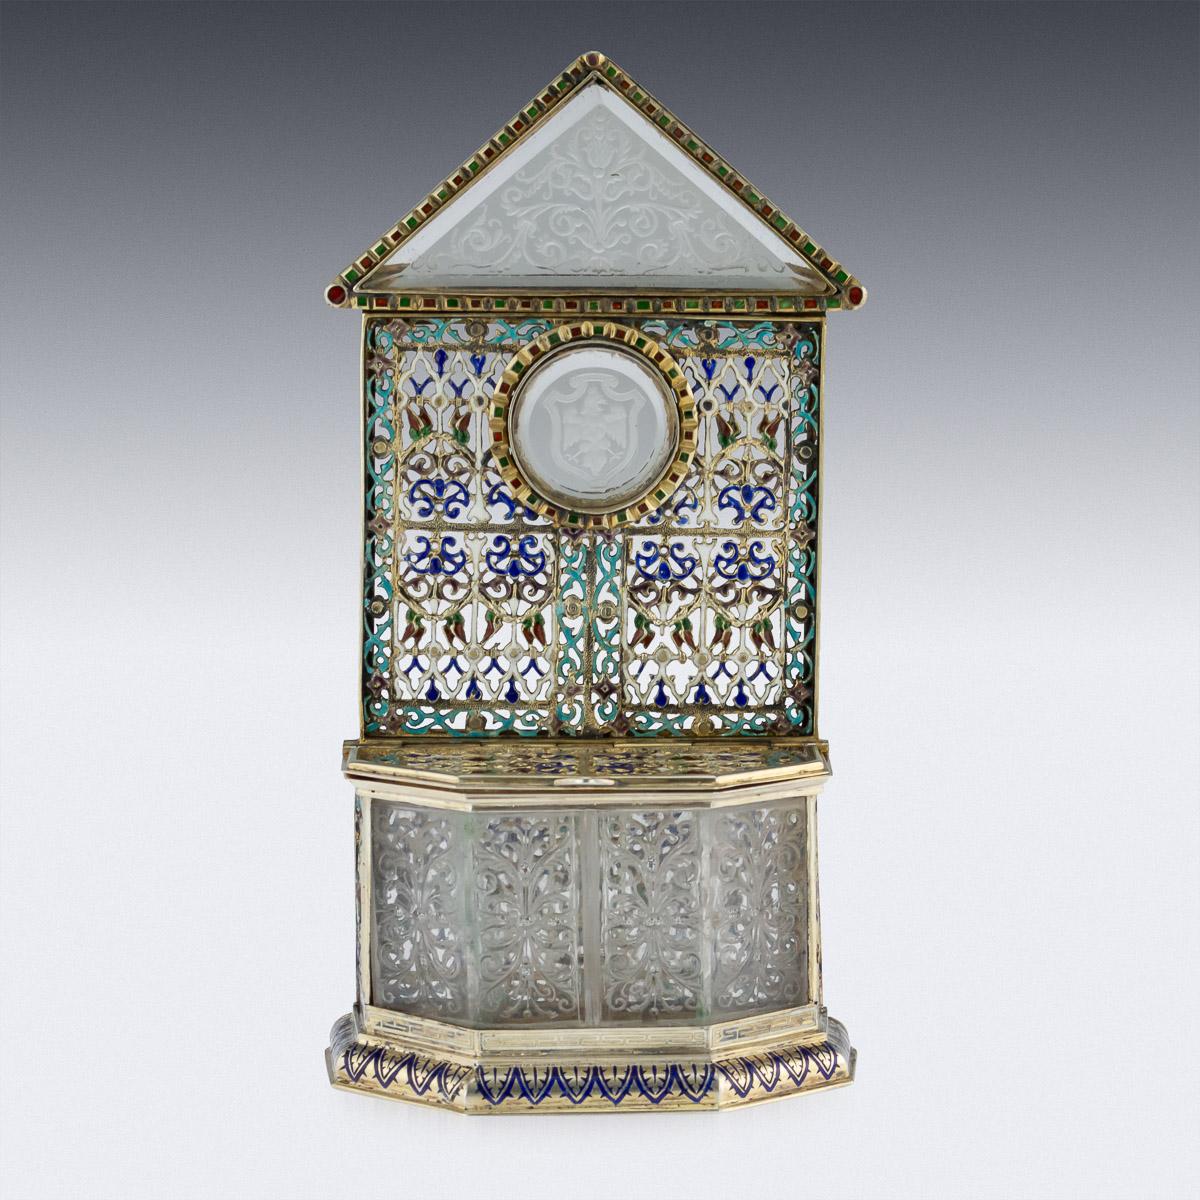 Austrian Solid Silver-Gilt and Enamel Reliquary by Rudolf Linke, circa 1890 In Good Condition For Sale In Royal Tunbridge Wells, Kent